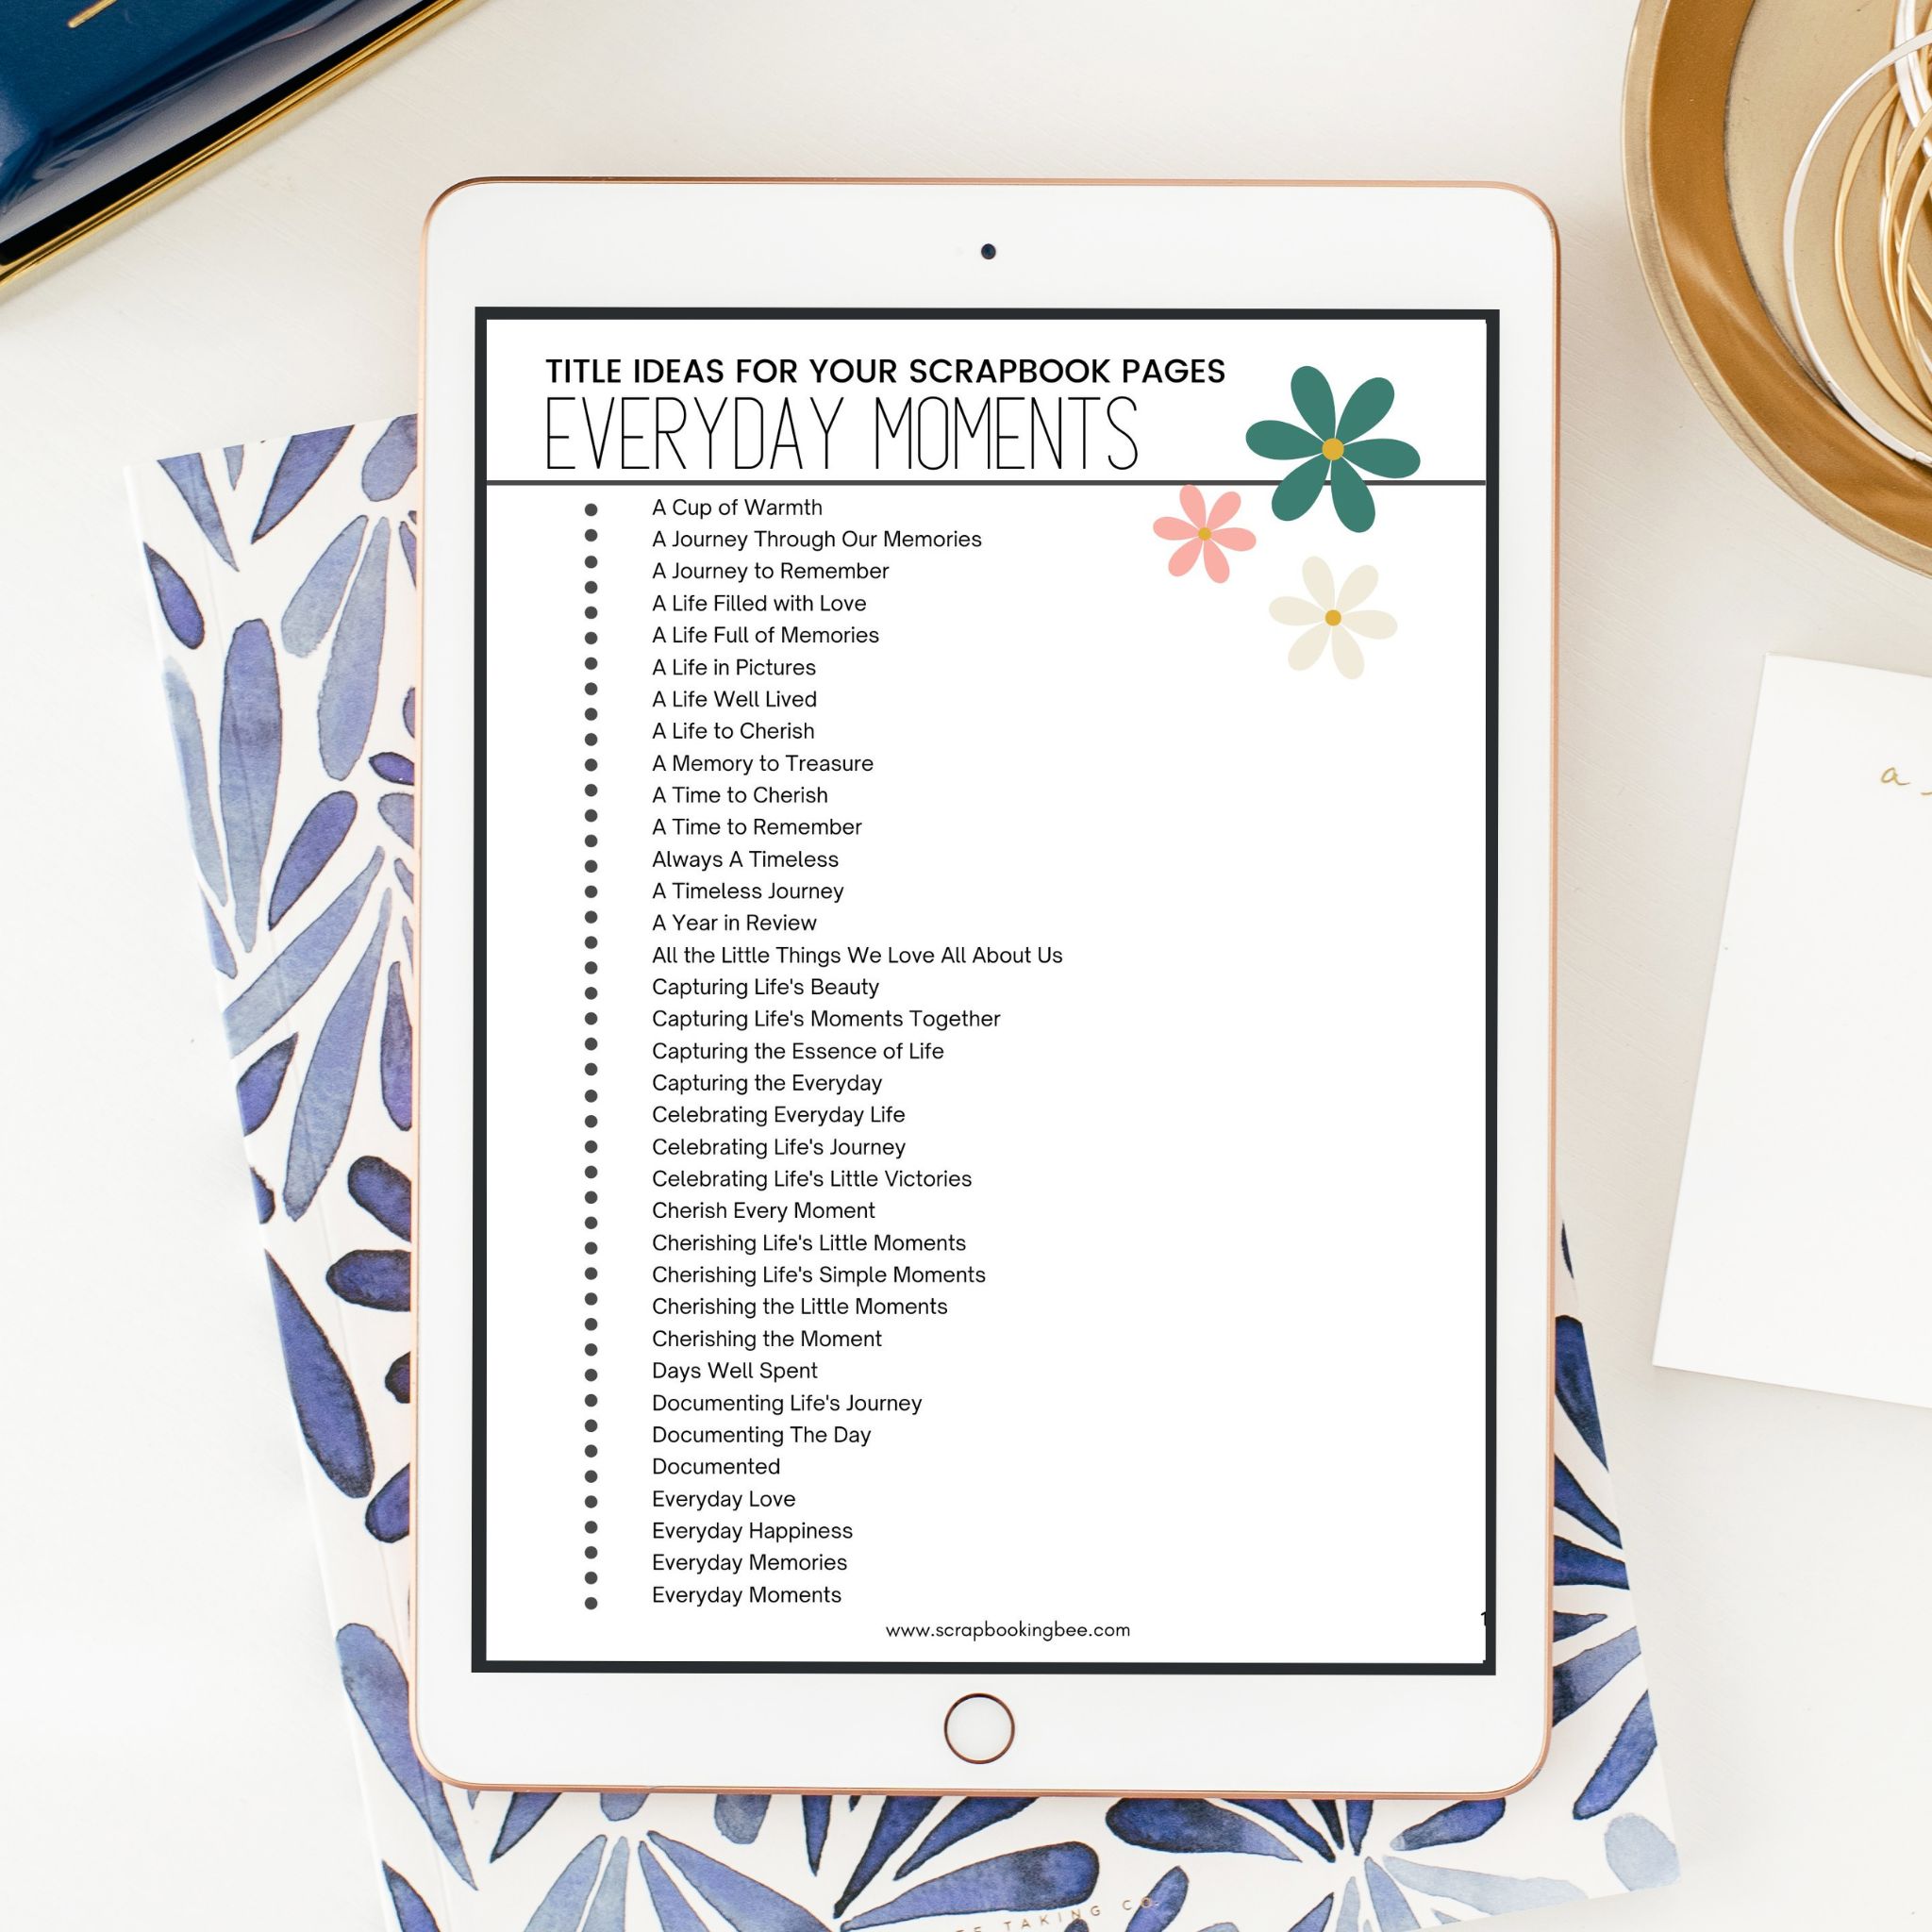 A printable list of scrapbook page titles for everyday moments in your life. 